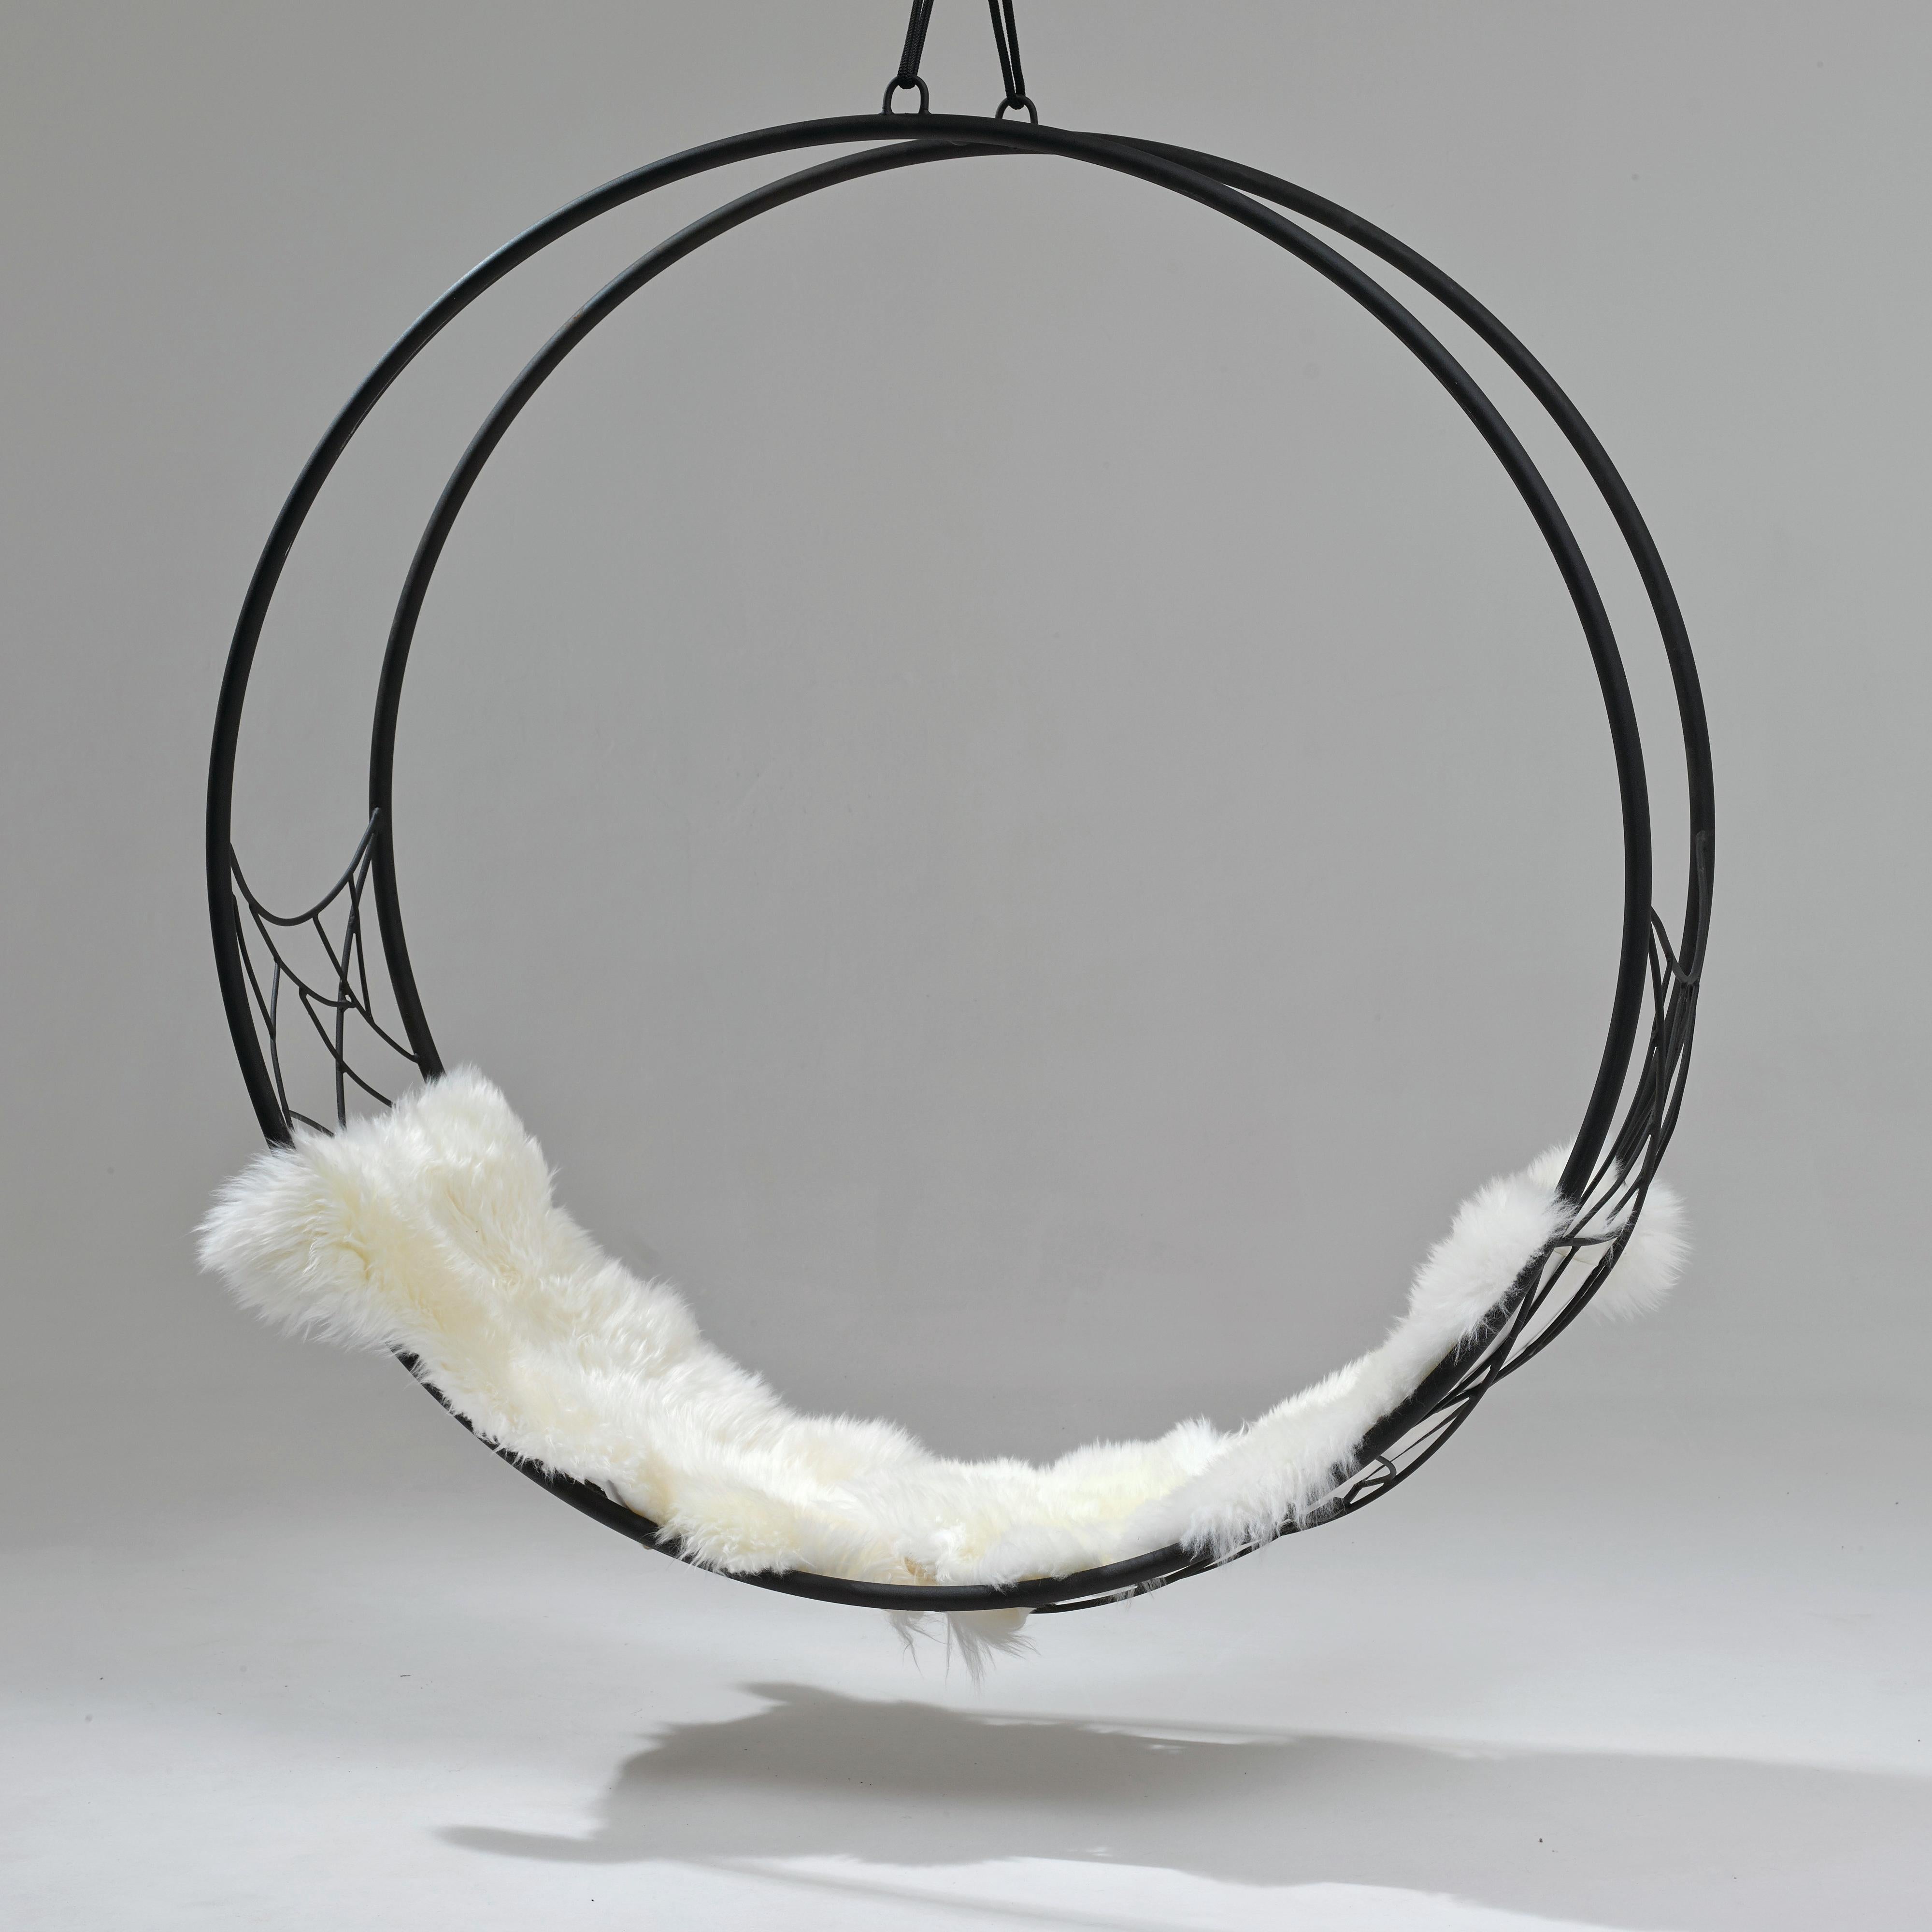 Galvanized Modern Circular Hanging Chair in Pieces for Economic Shipping For Sale